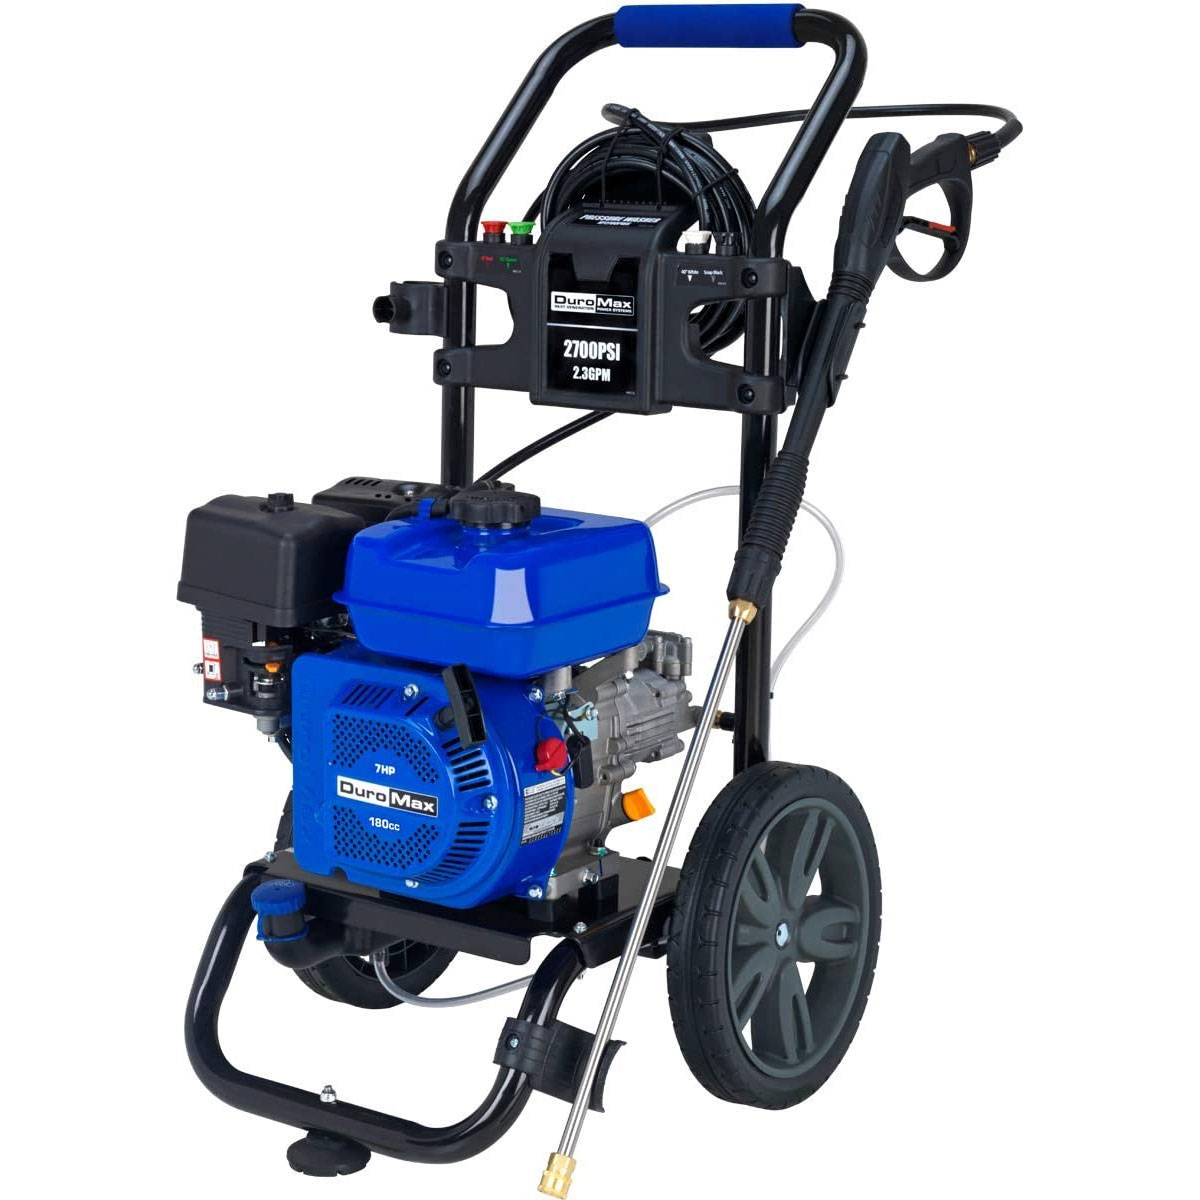 DuroMax XP3100PWT 3100 PSI 2.5GPM 7HP Gas Engine Pressure Washer